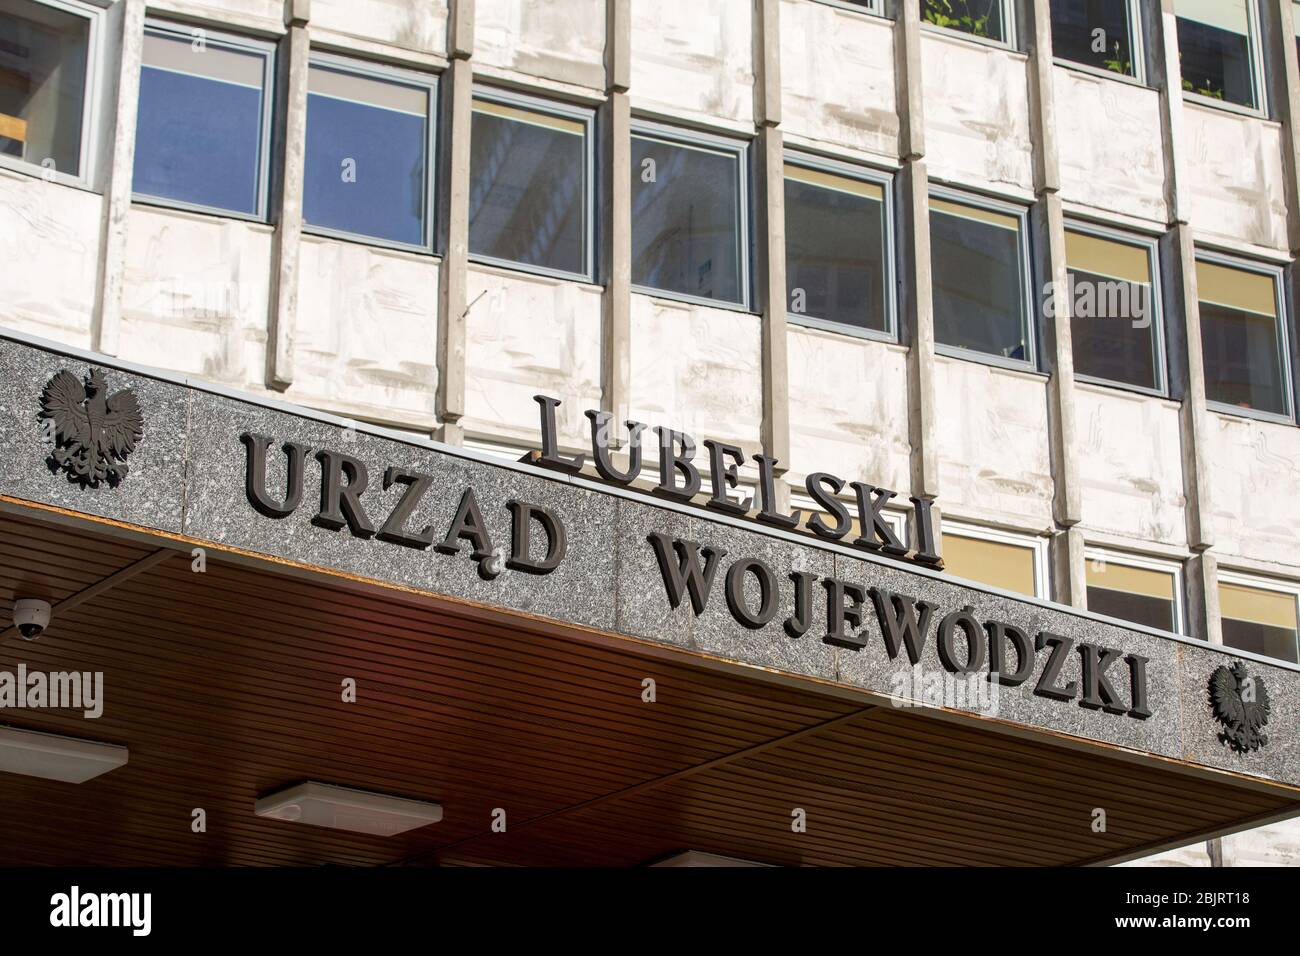 View of the Lubelski Urzad Wojewodzki (The Lubelskie Province Governor’s Office) during the Coronavirus (COVID-19) lockdown crisis.Due to coronavirus restrictions on movement, bars and restaurants are closed and the streets of Polish cities are depopulated. Stock Photo